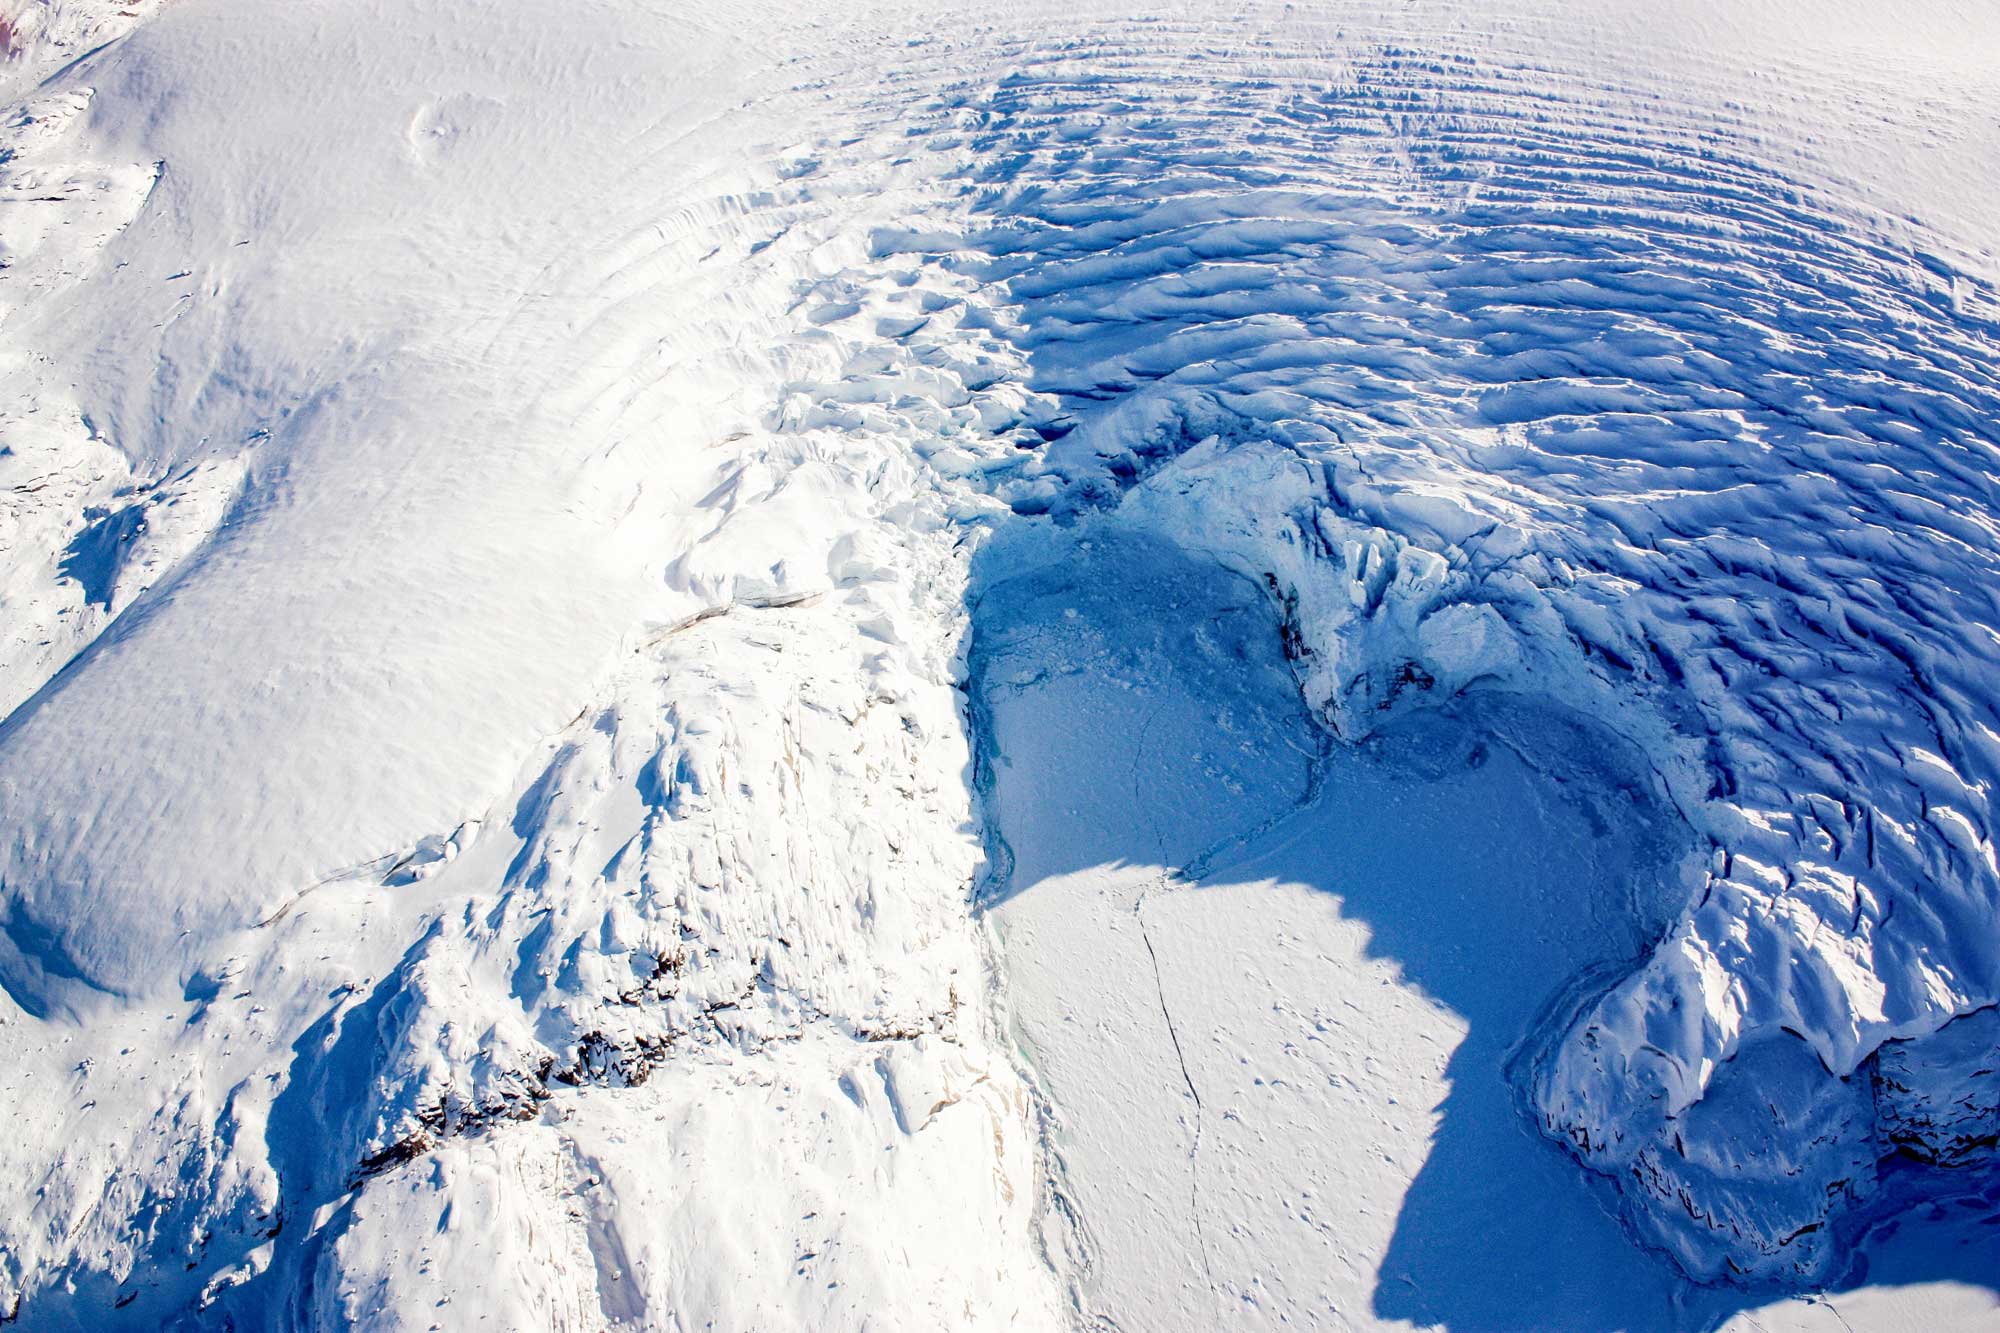 Photo of the edge of a glacier flowing into the sea on the margin of Greenland. The photo shows calving at the edge of the glacial margin.